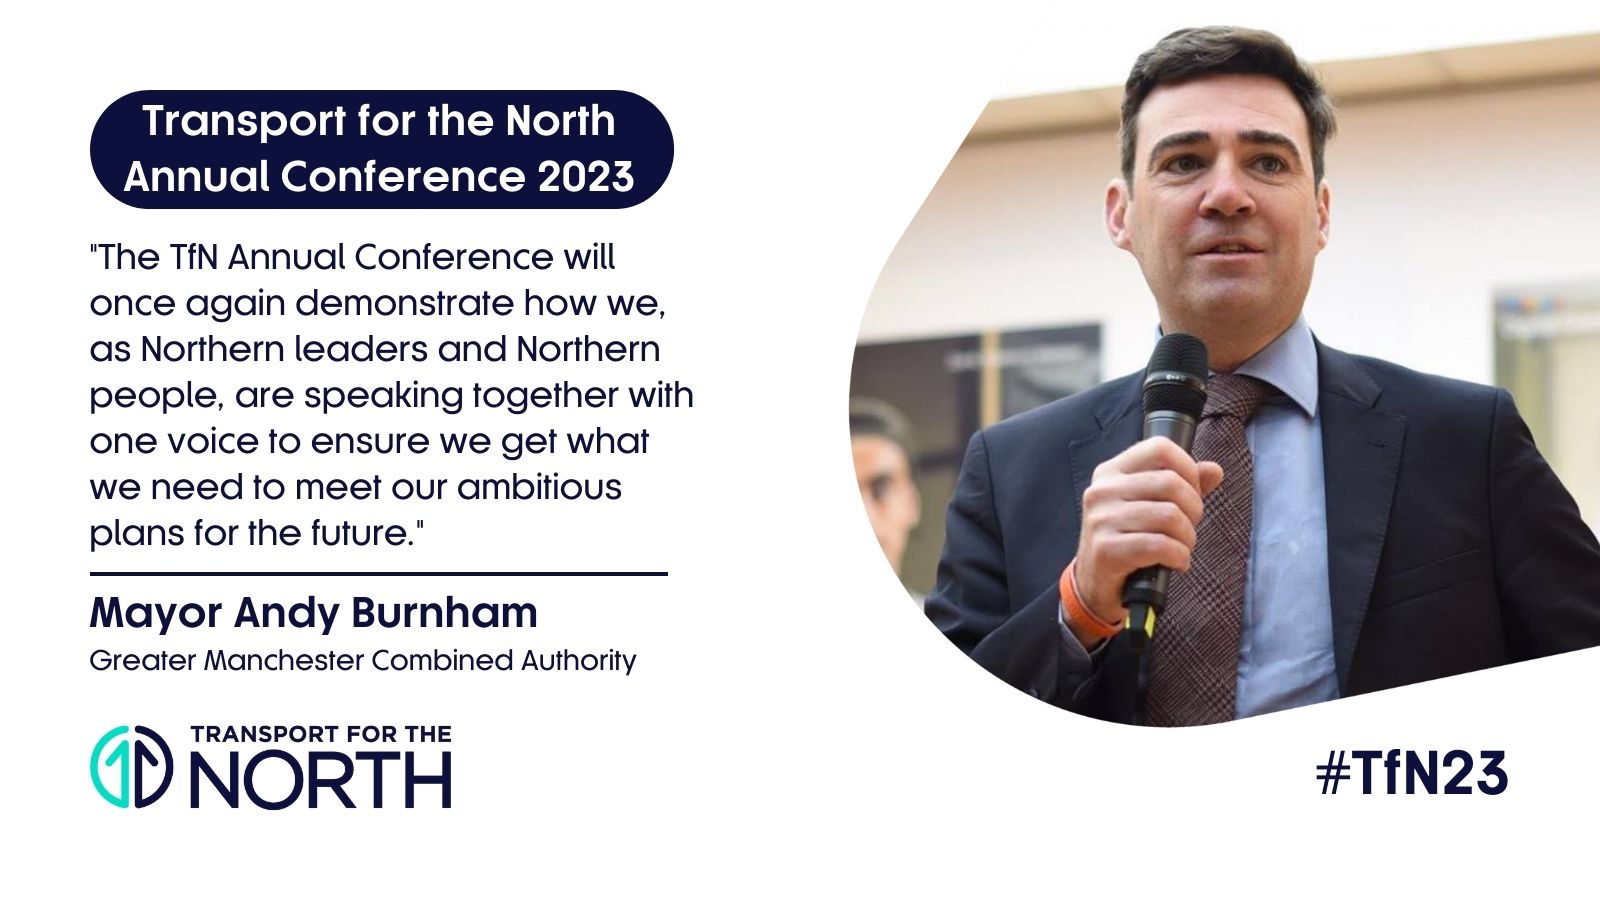 Mayor Andy Burnham quote ahead of TfN23 Conference